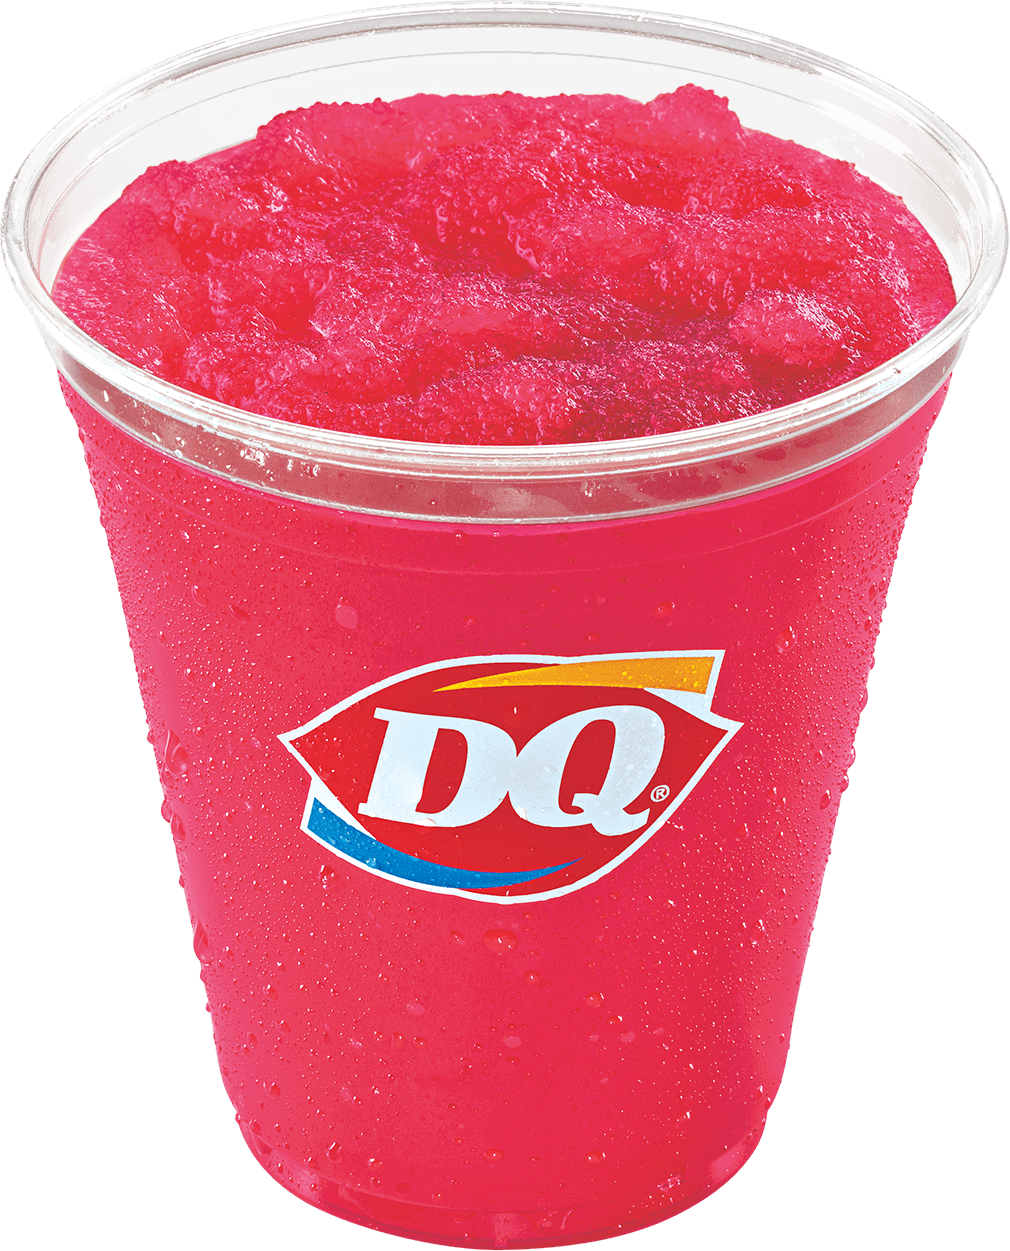 Dairy Queen Pink Punch Misty Slush Nutrition Facts